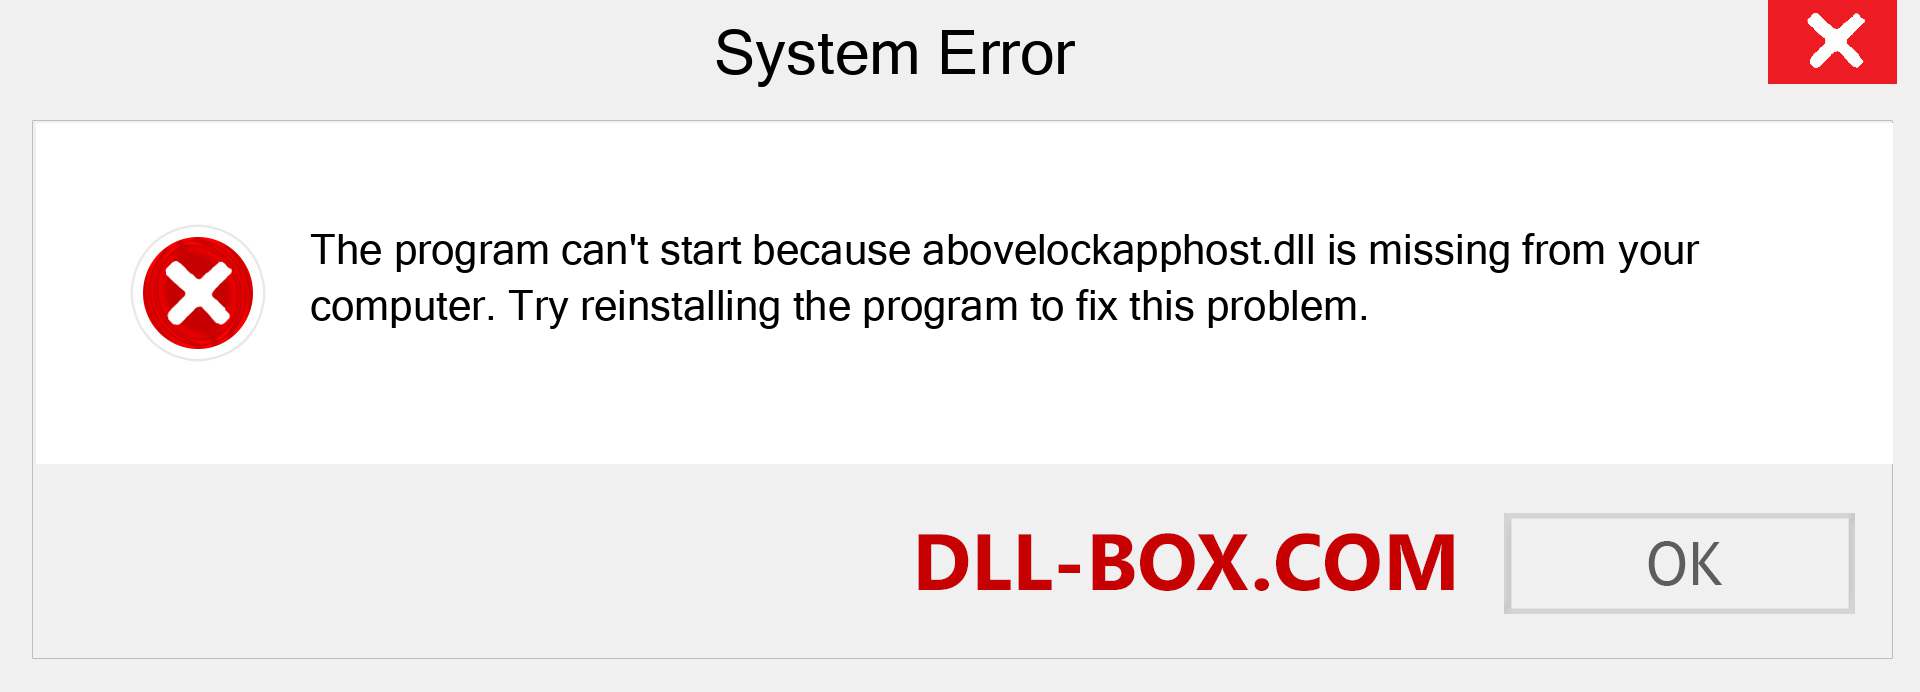  abovelockapphost.dll file is missing?. Download for Windows 7, 8, 10 - Fix  abovelockapphost dll Missing Error on Windows, photos, images